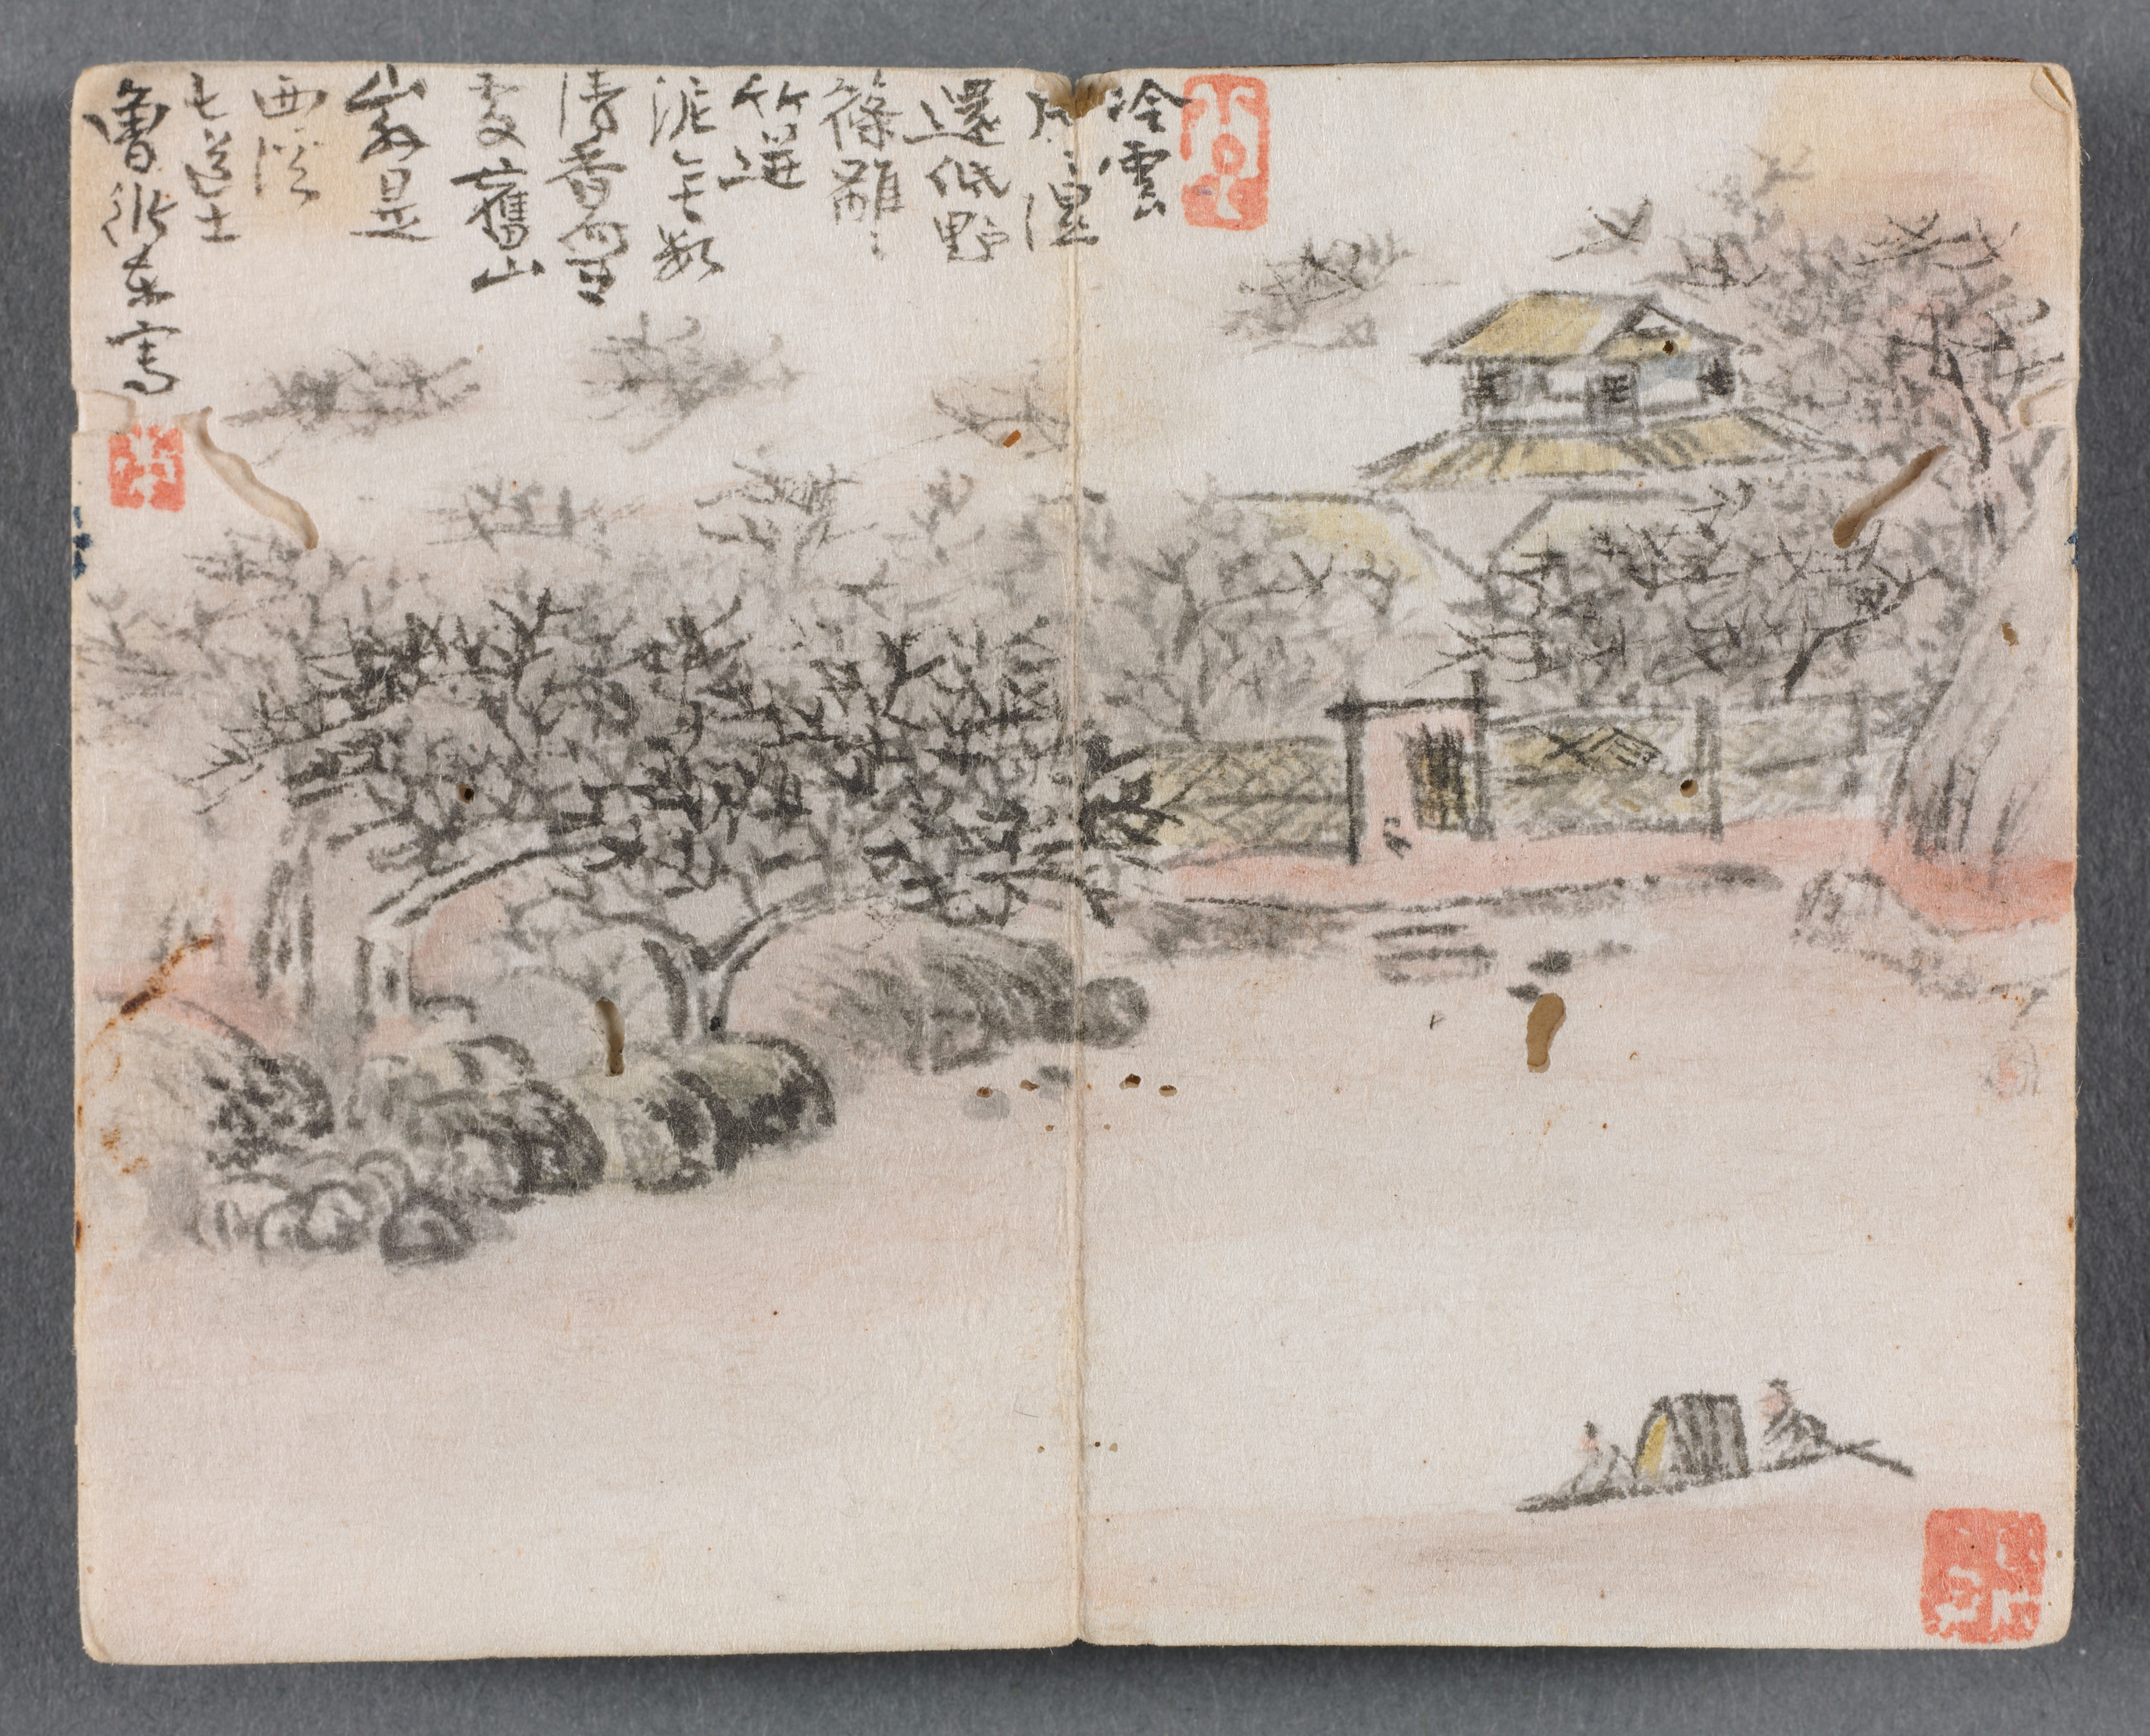 Miniature Album with Figures and Landscape (Landscape with Two Boatmen)